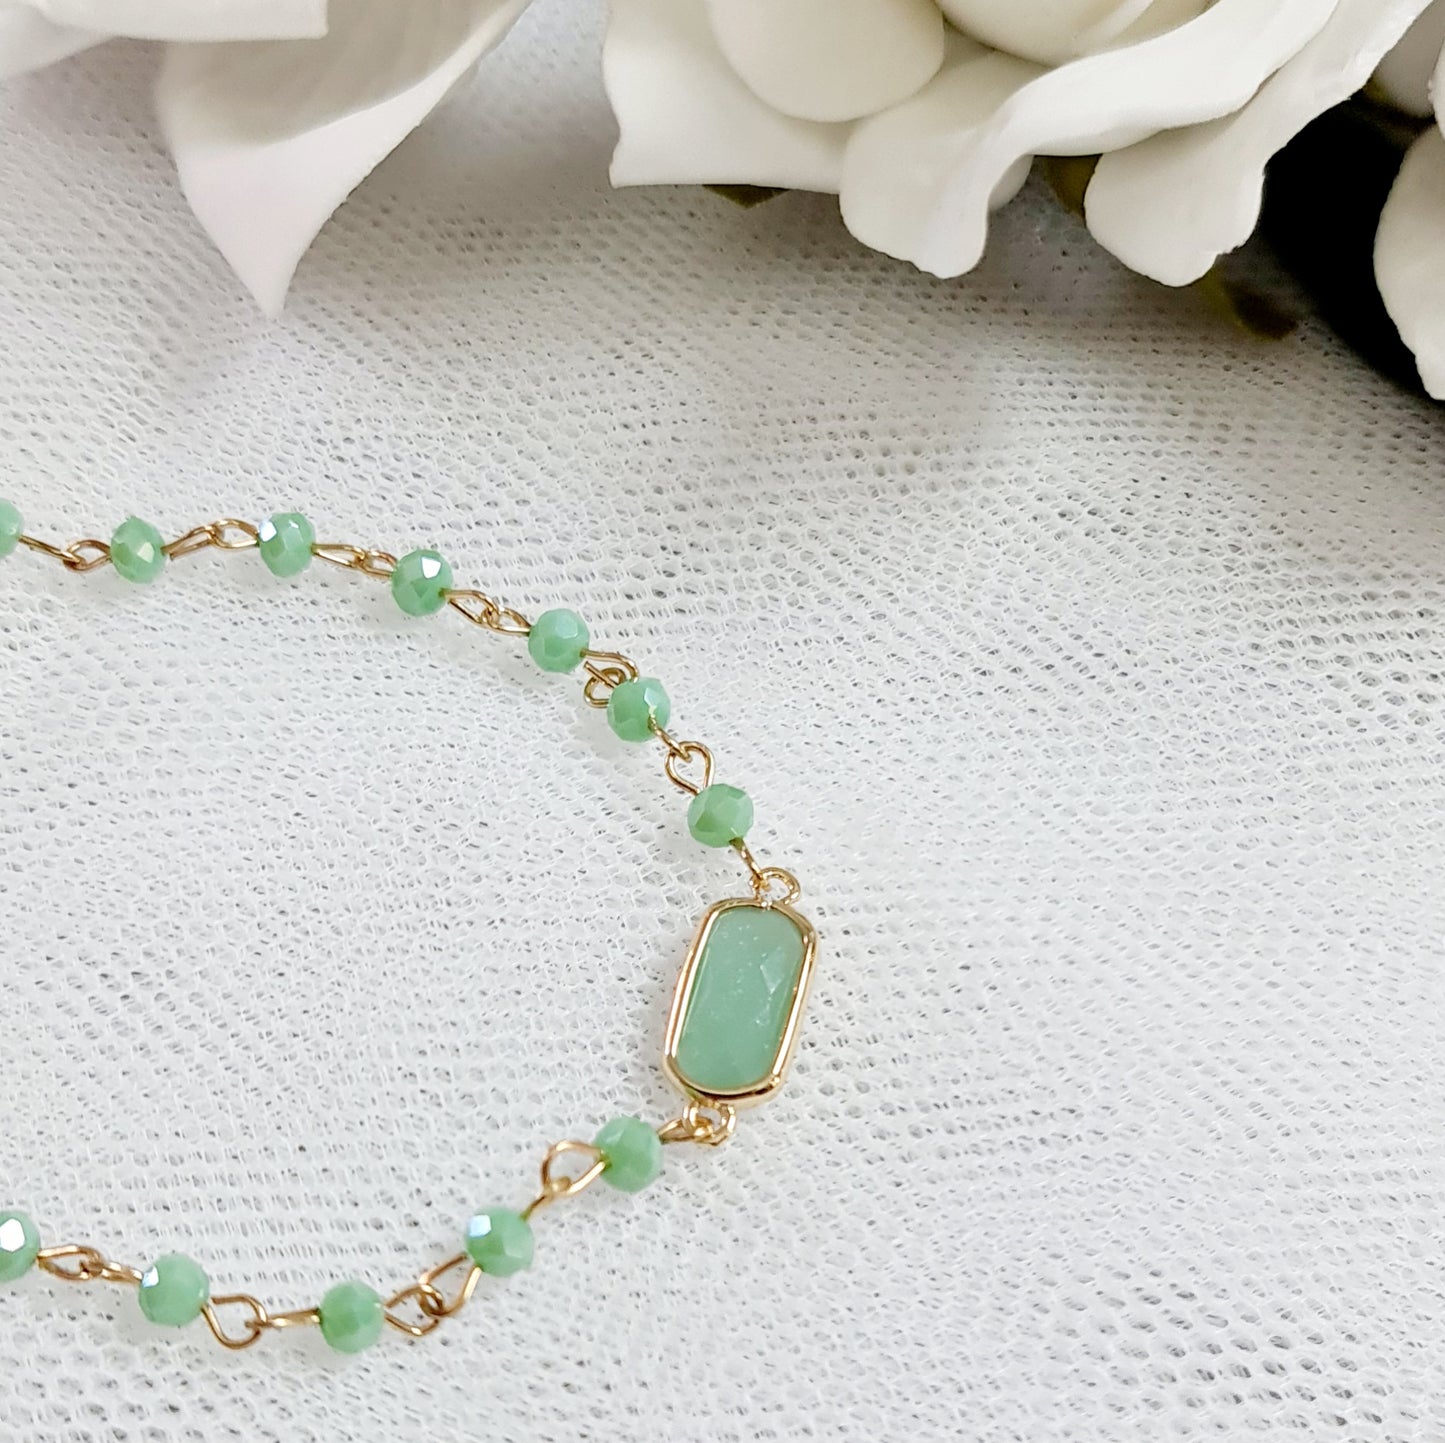 Crystal Clasp Bracelet - Gold and Green